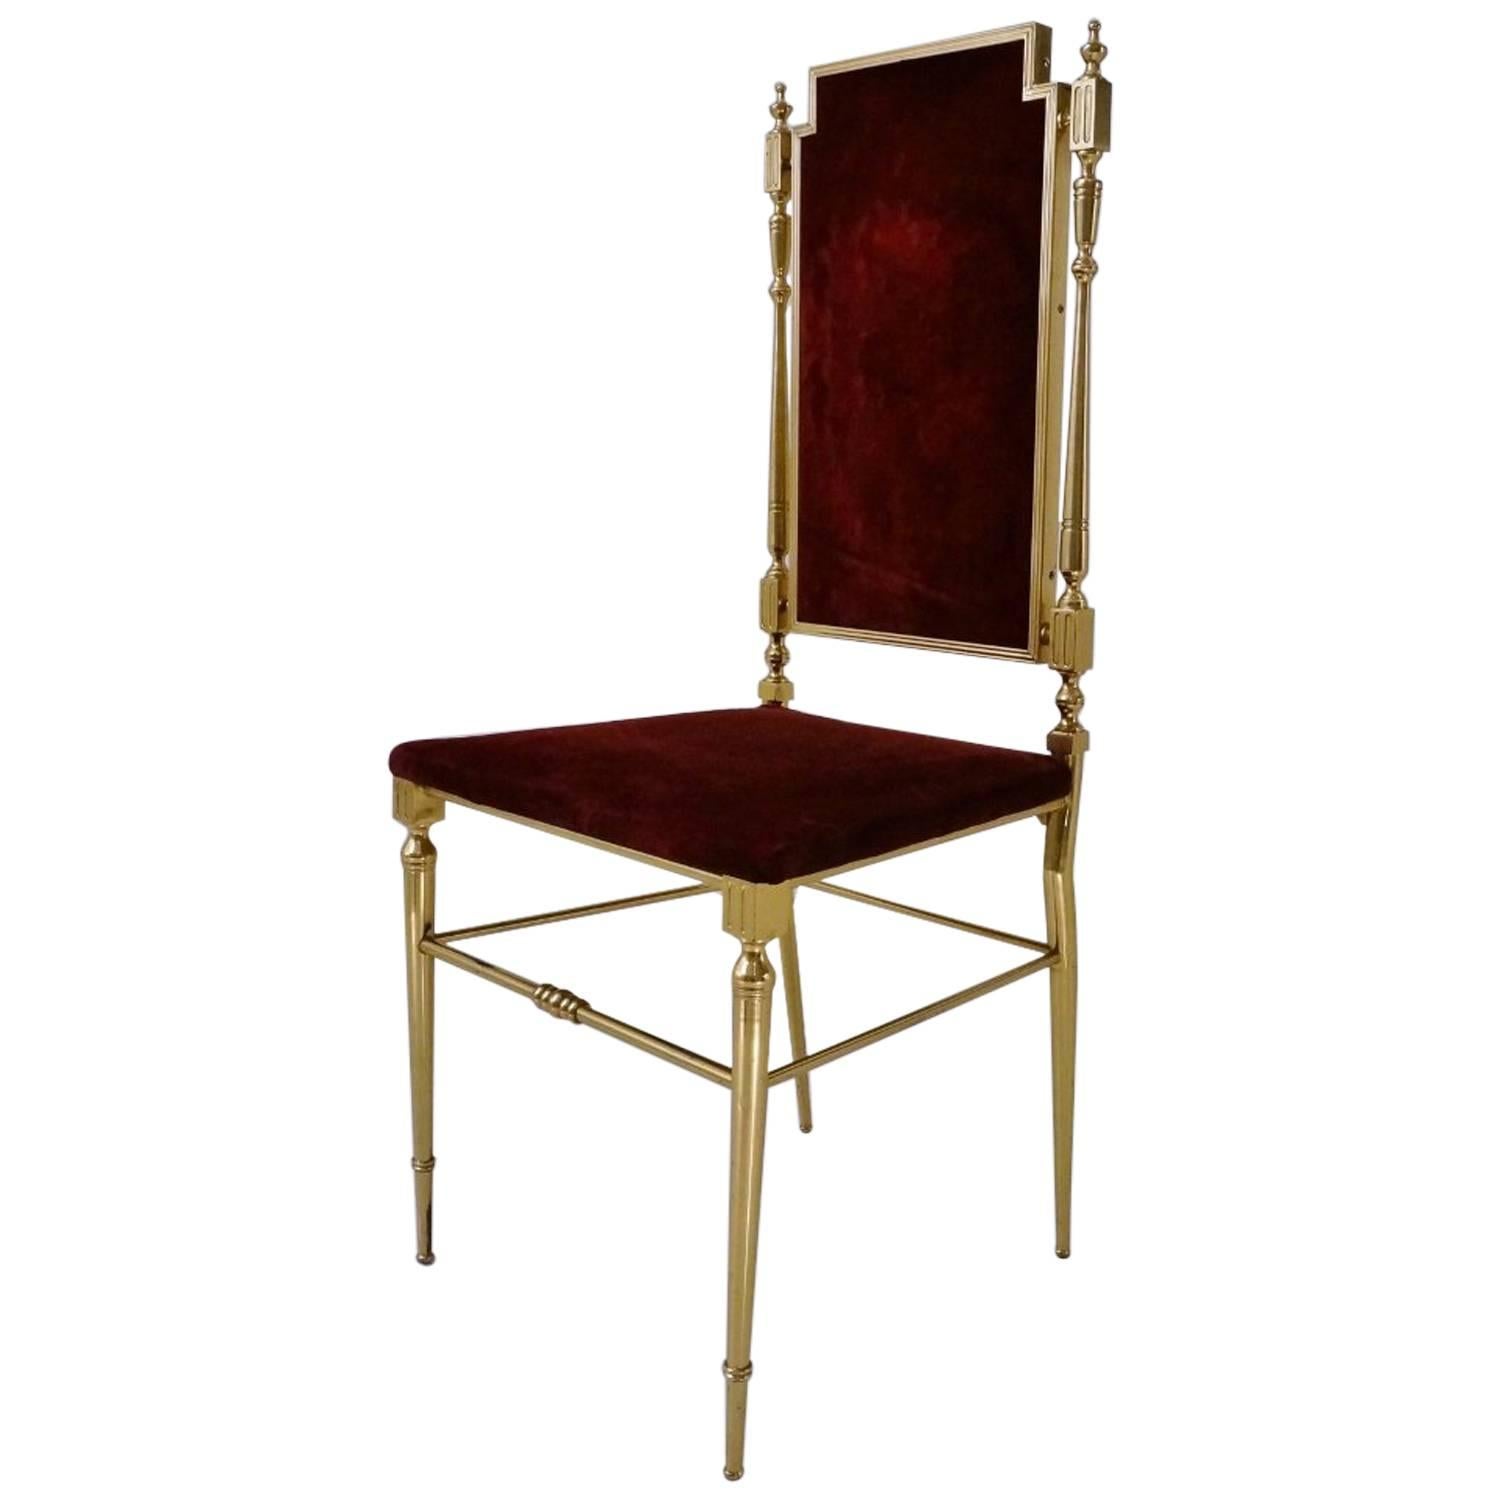 Neoclassical Brass Chair, French, circa 1950s